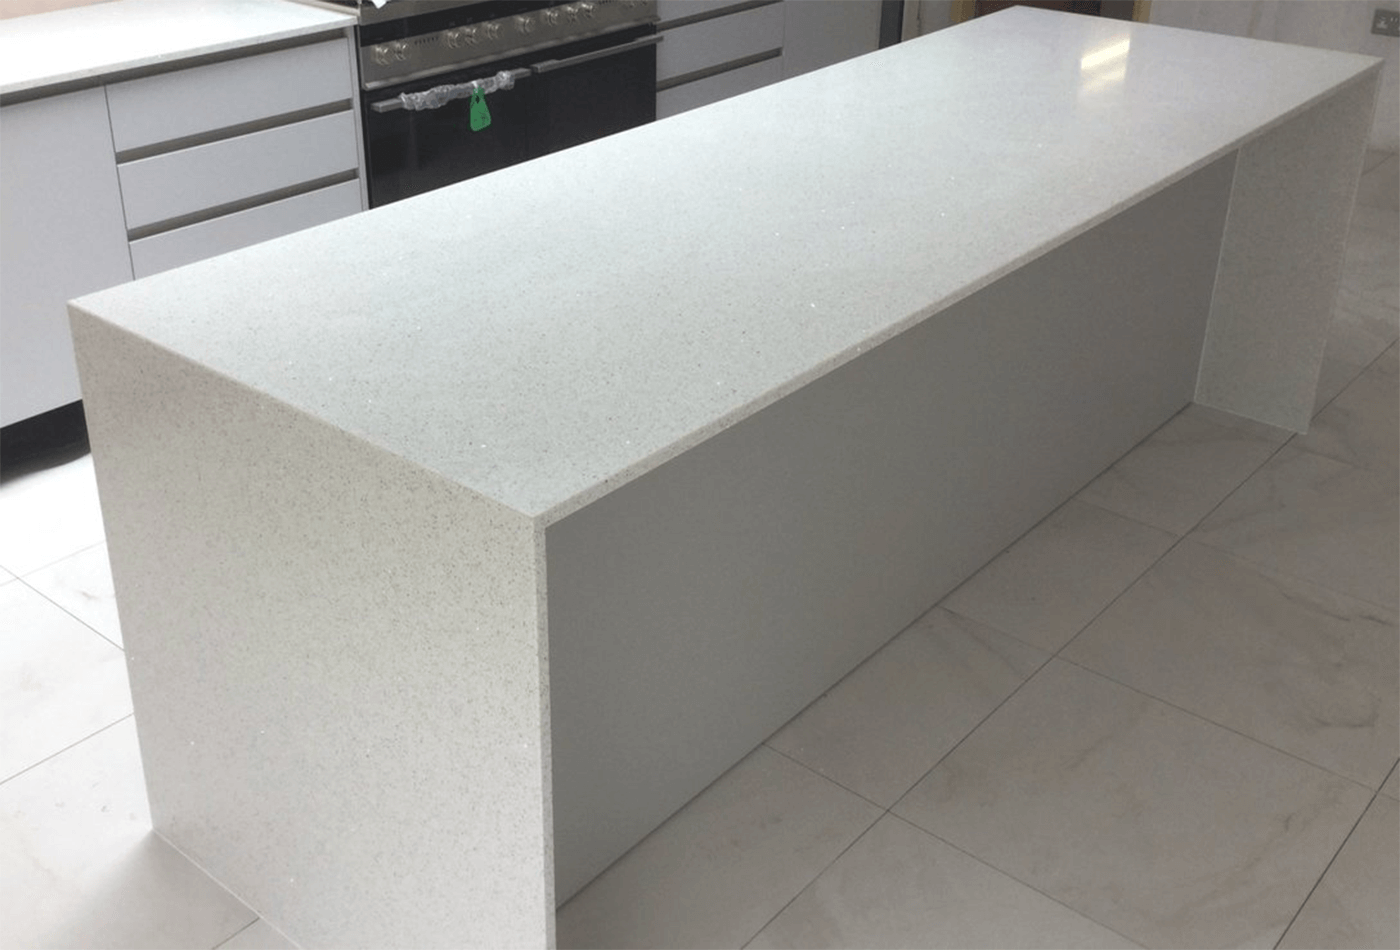 Get this Classic Range of Silestone Collections from Work-tops.com